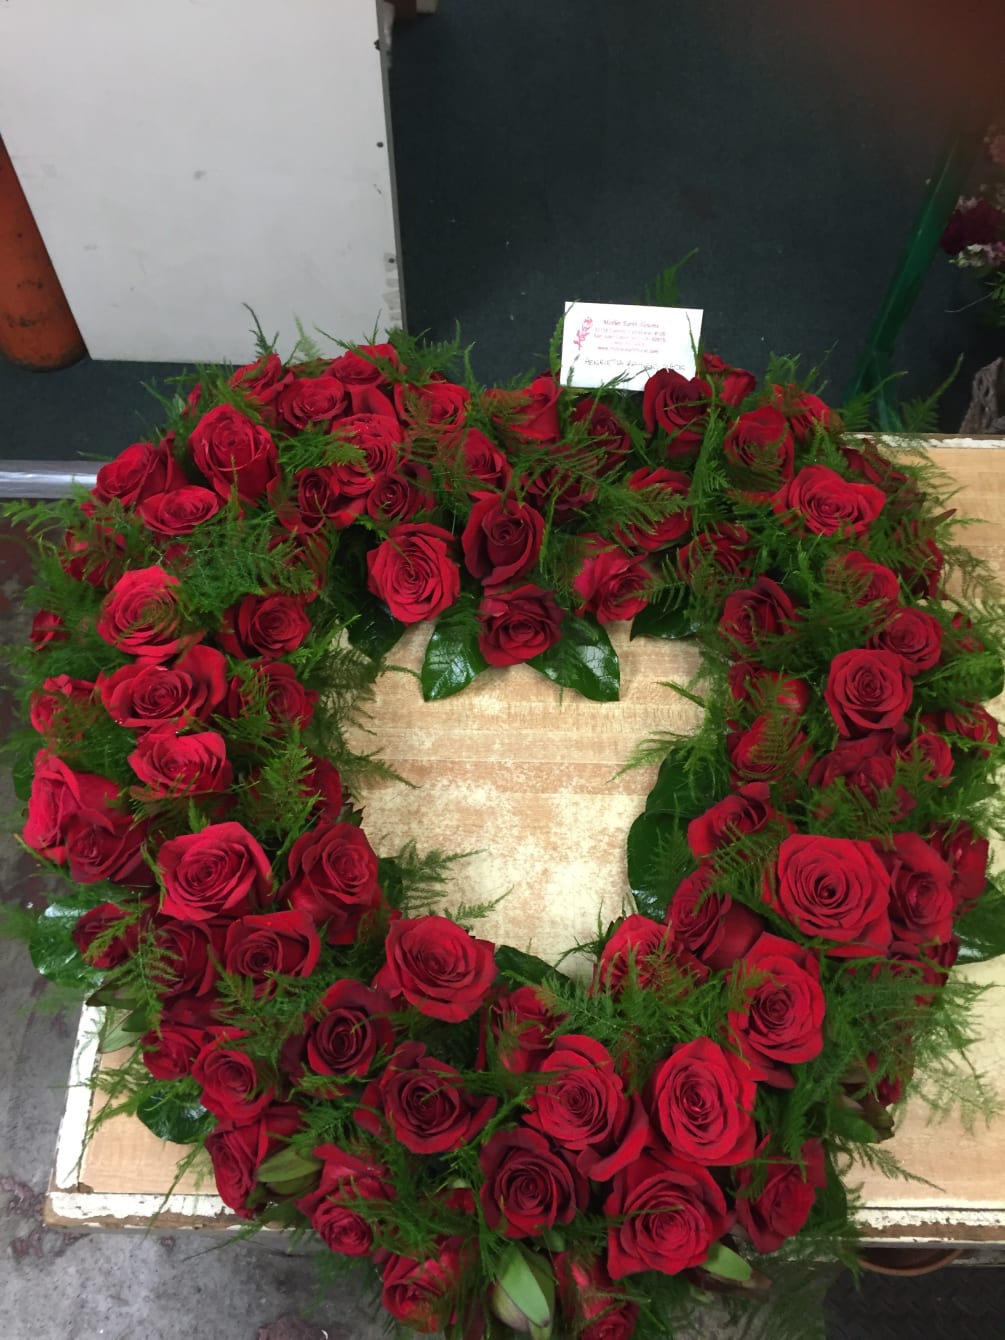 HEART OF ROSES FOR FUNERAL SERVICE COMES ON STANDING EASLE 
CAN BE